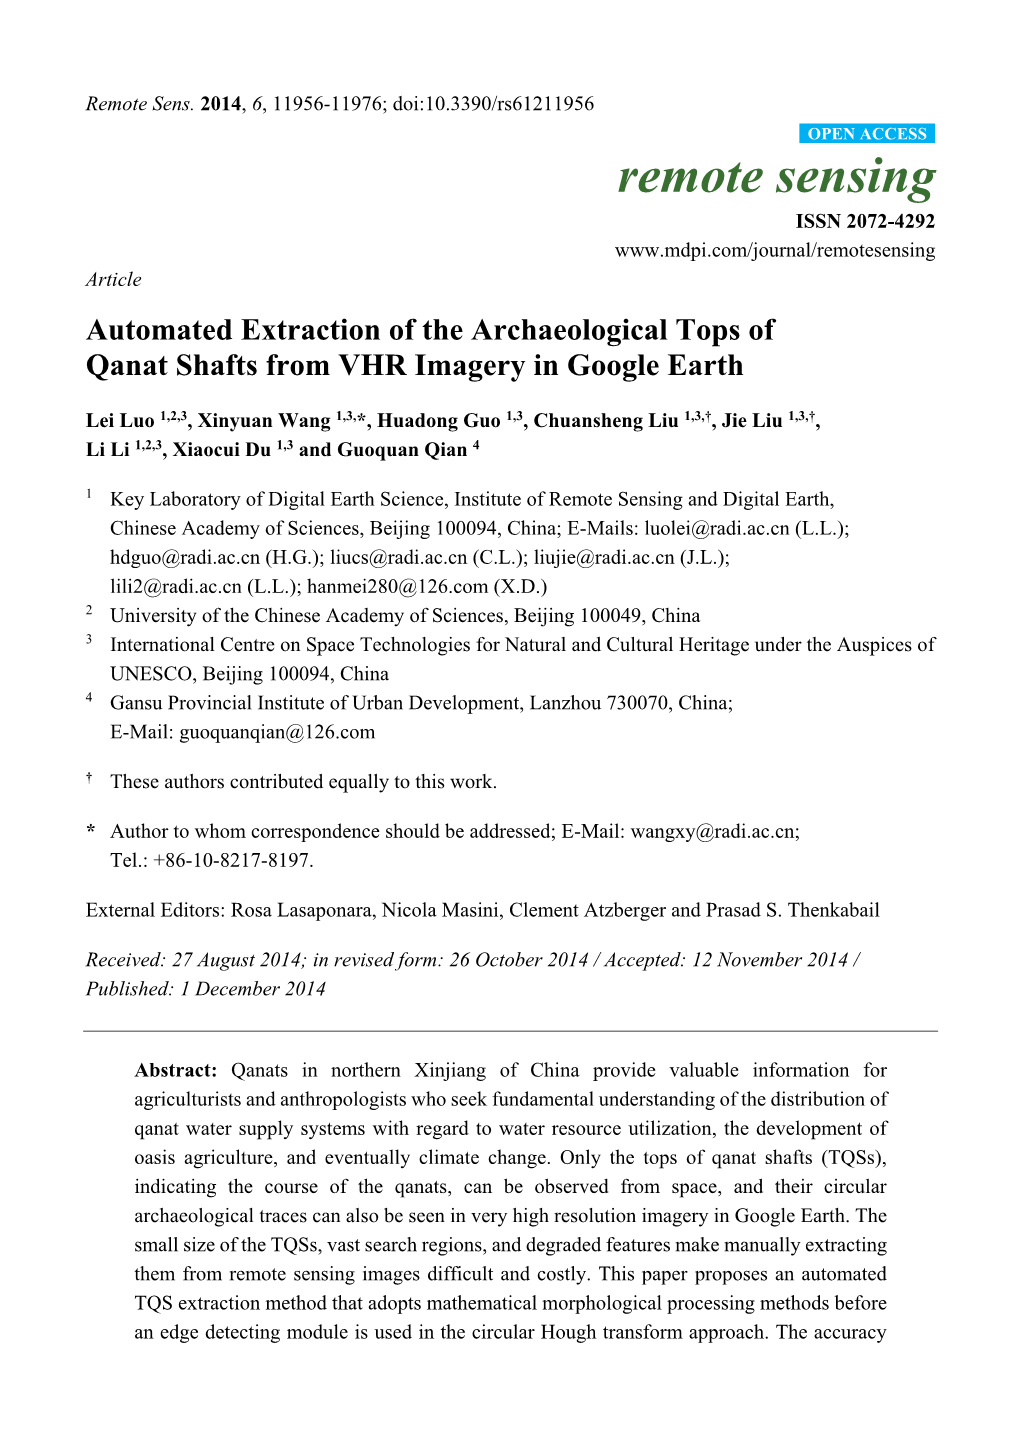 Automated Extraction of the Archaeological Tops of Qanat Shafts from VHR Imagery in Google Earth